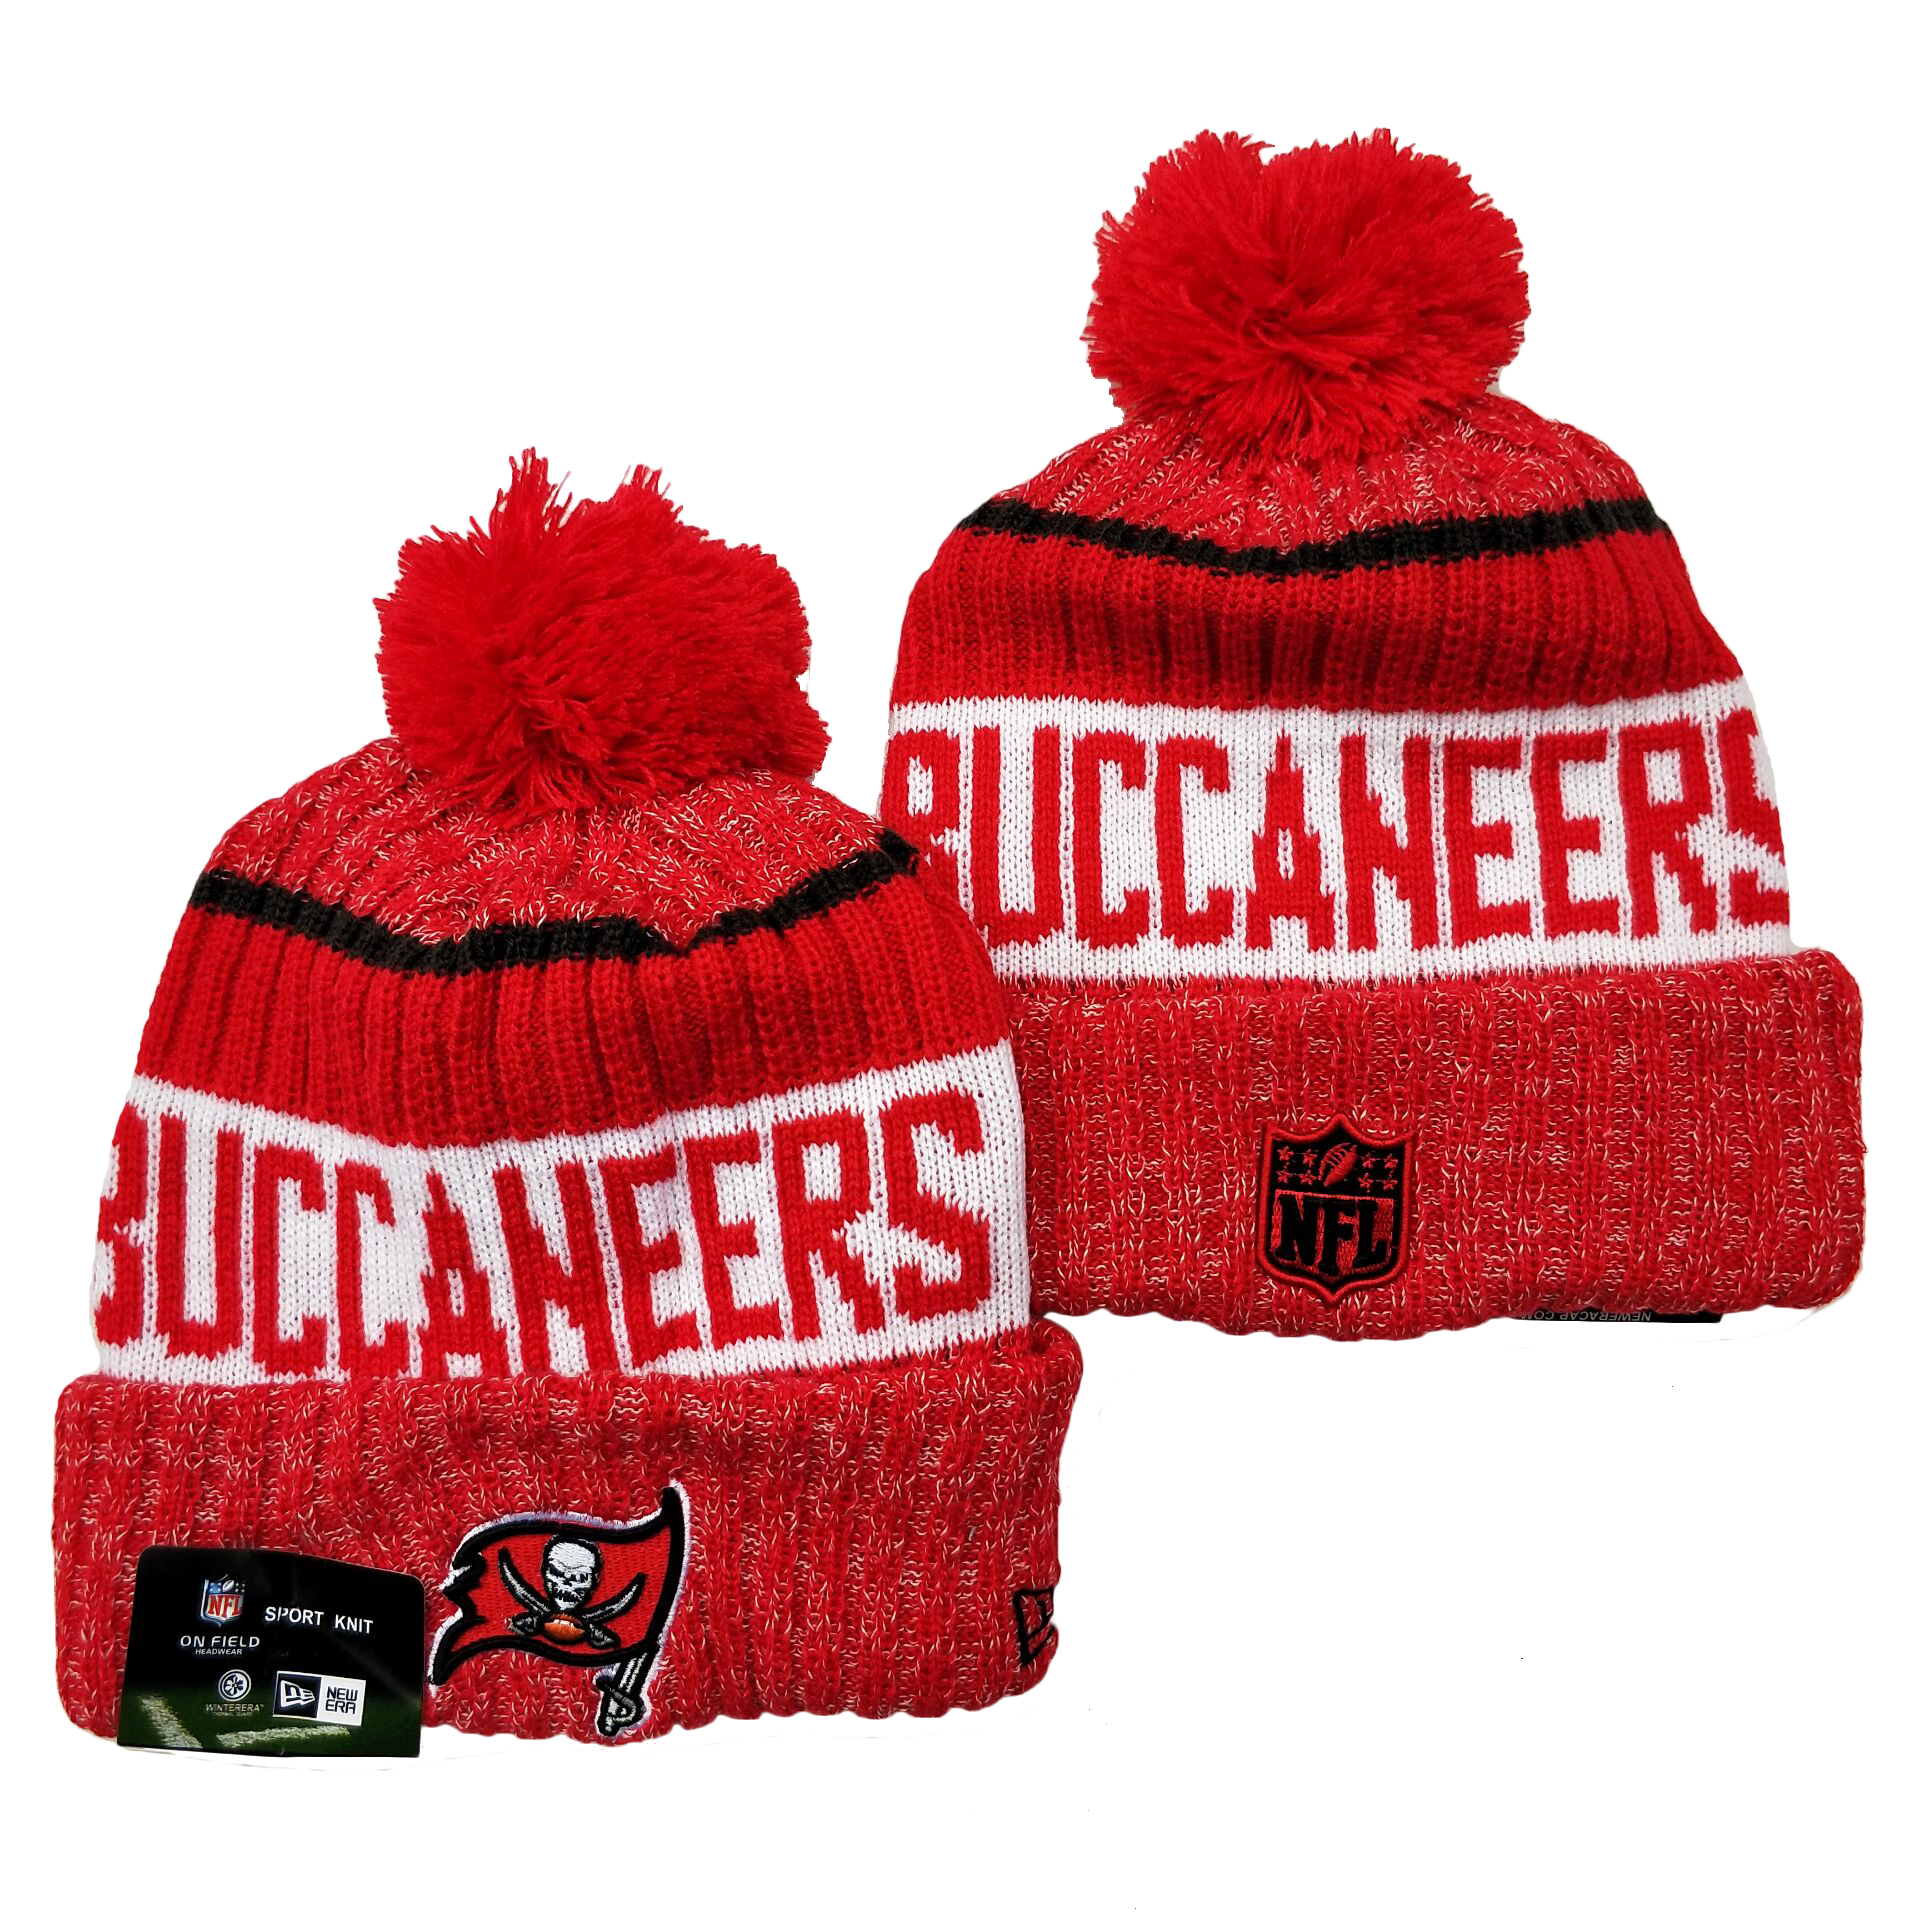 Tampa Bay Buccaneers Knit Hats 040